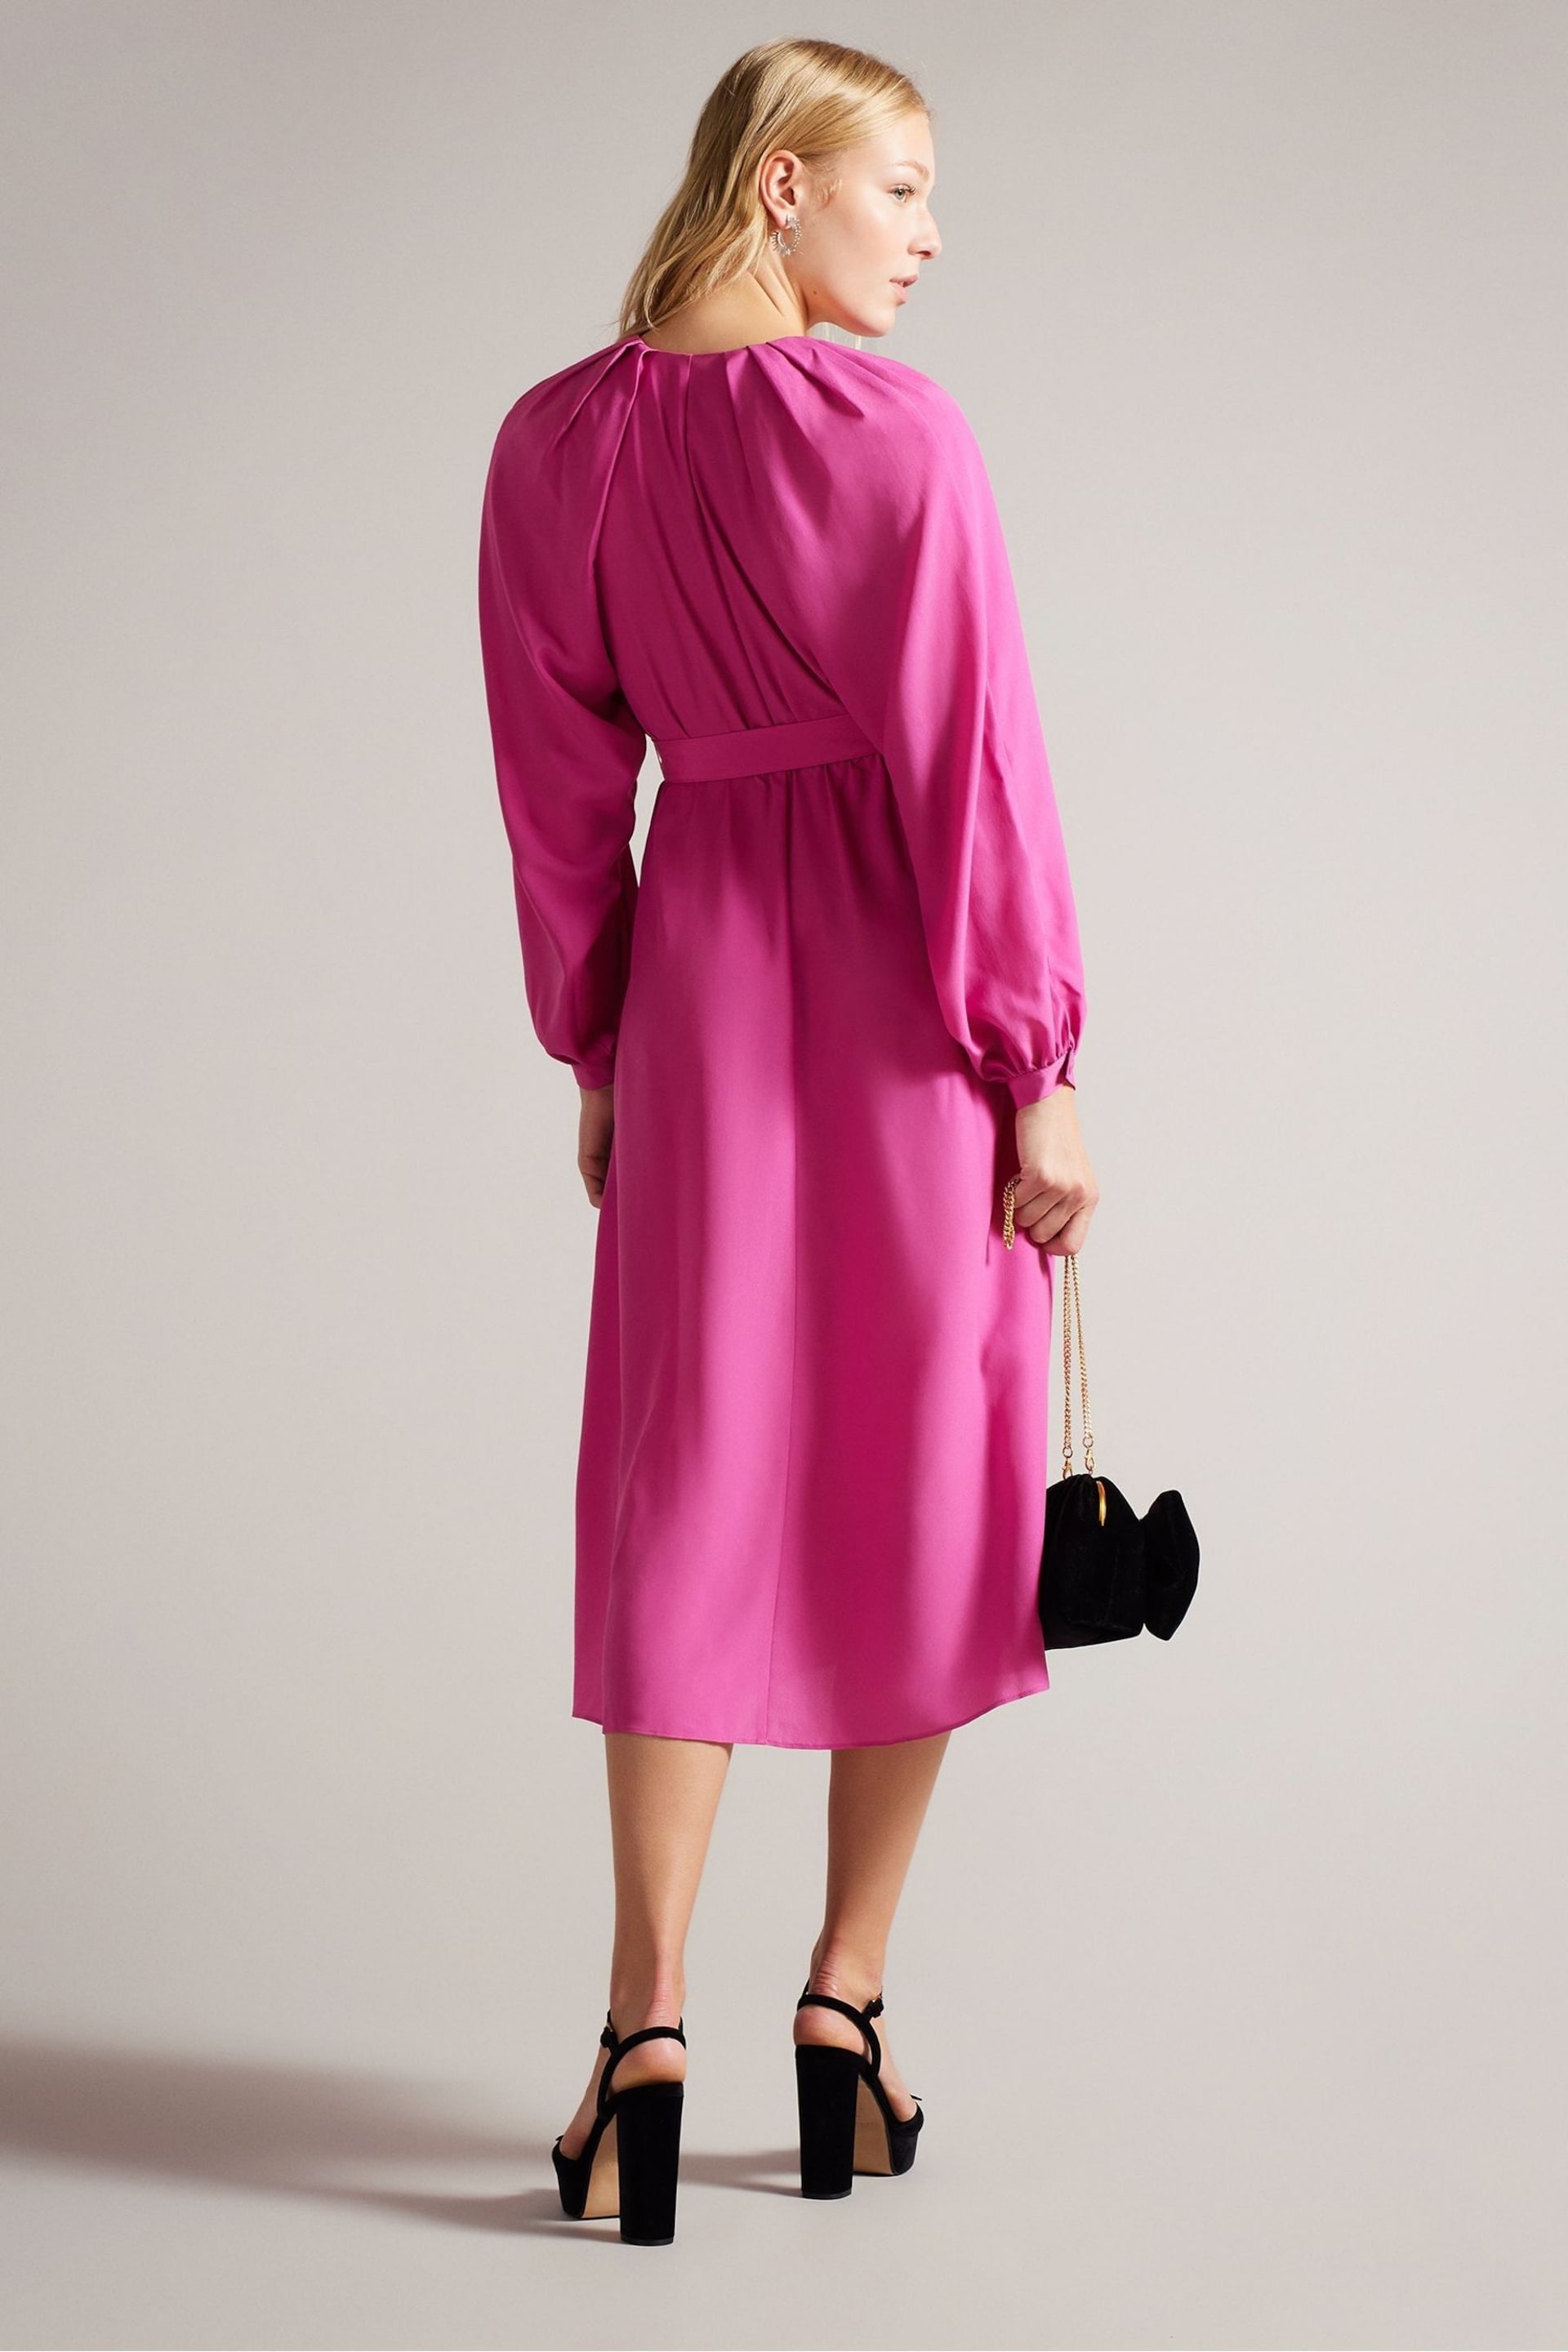 Ted Baker Pink Comus Midi Shirt Dress With Gathered Neck - Image 2 of 5